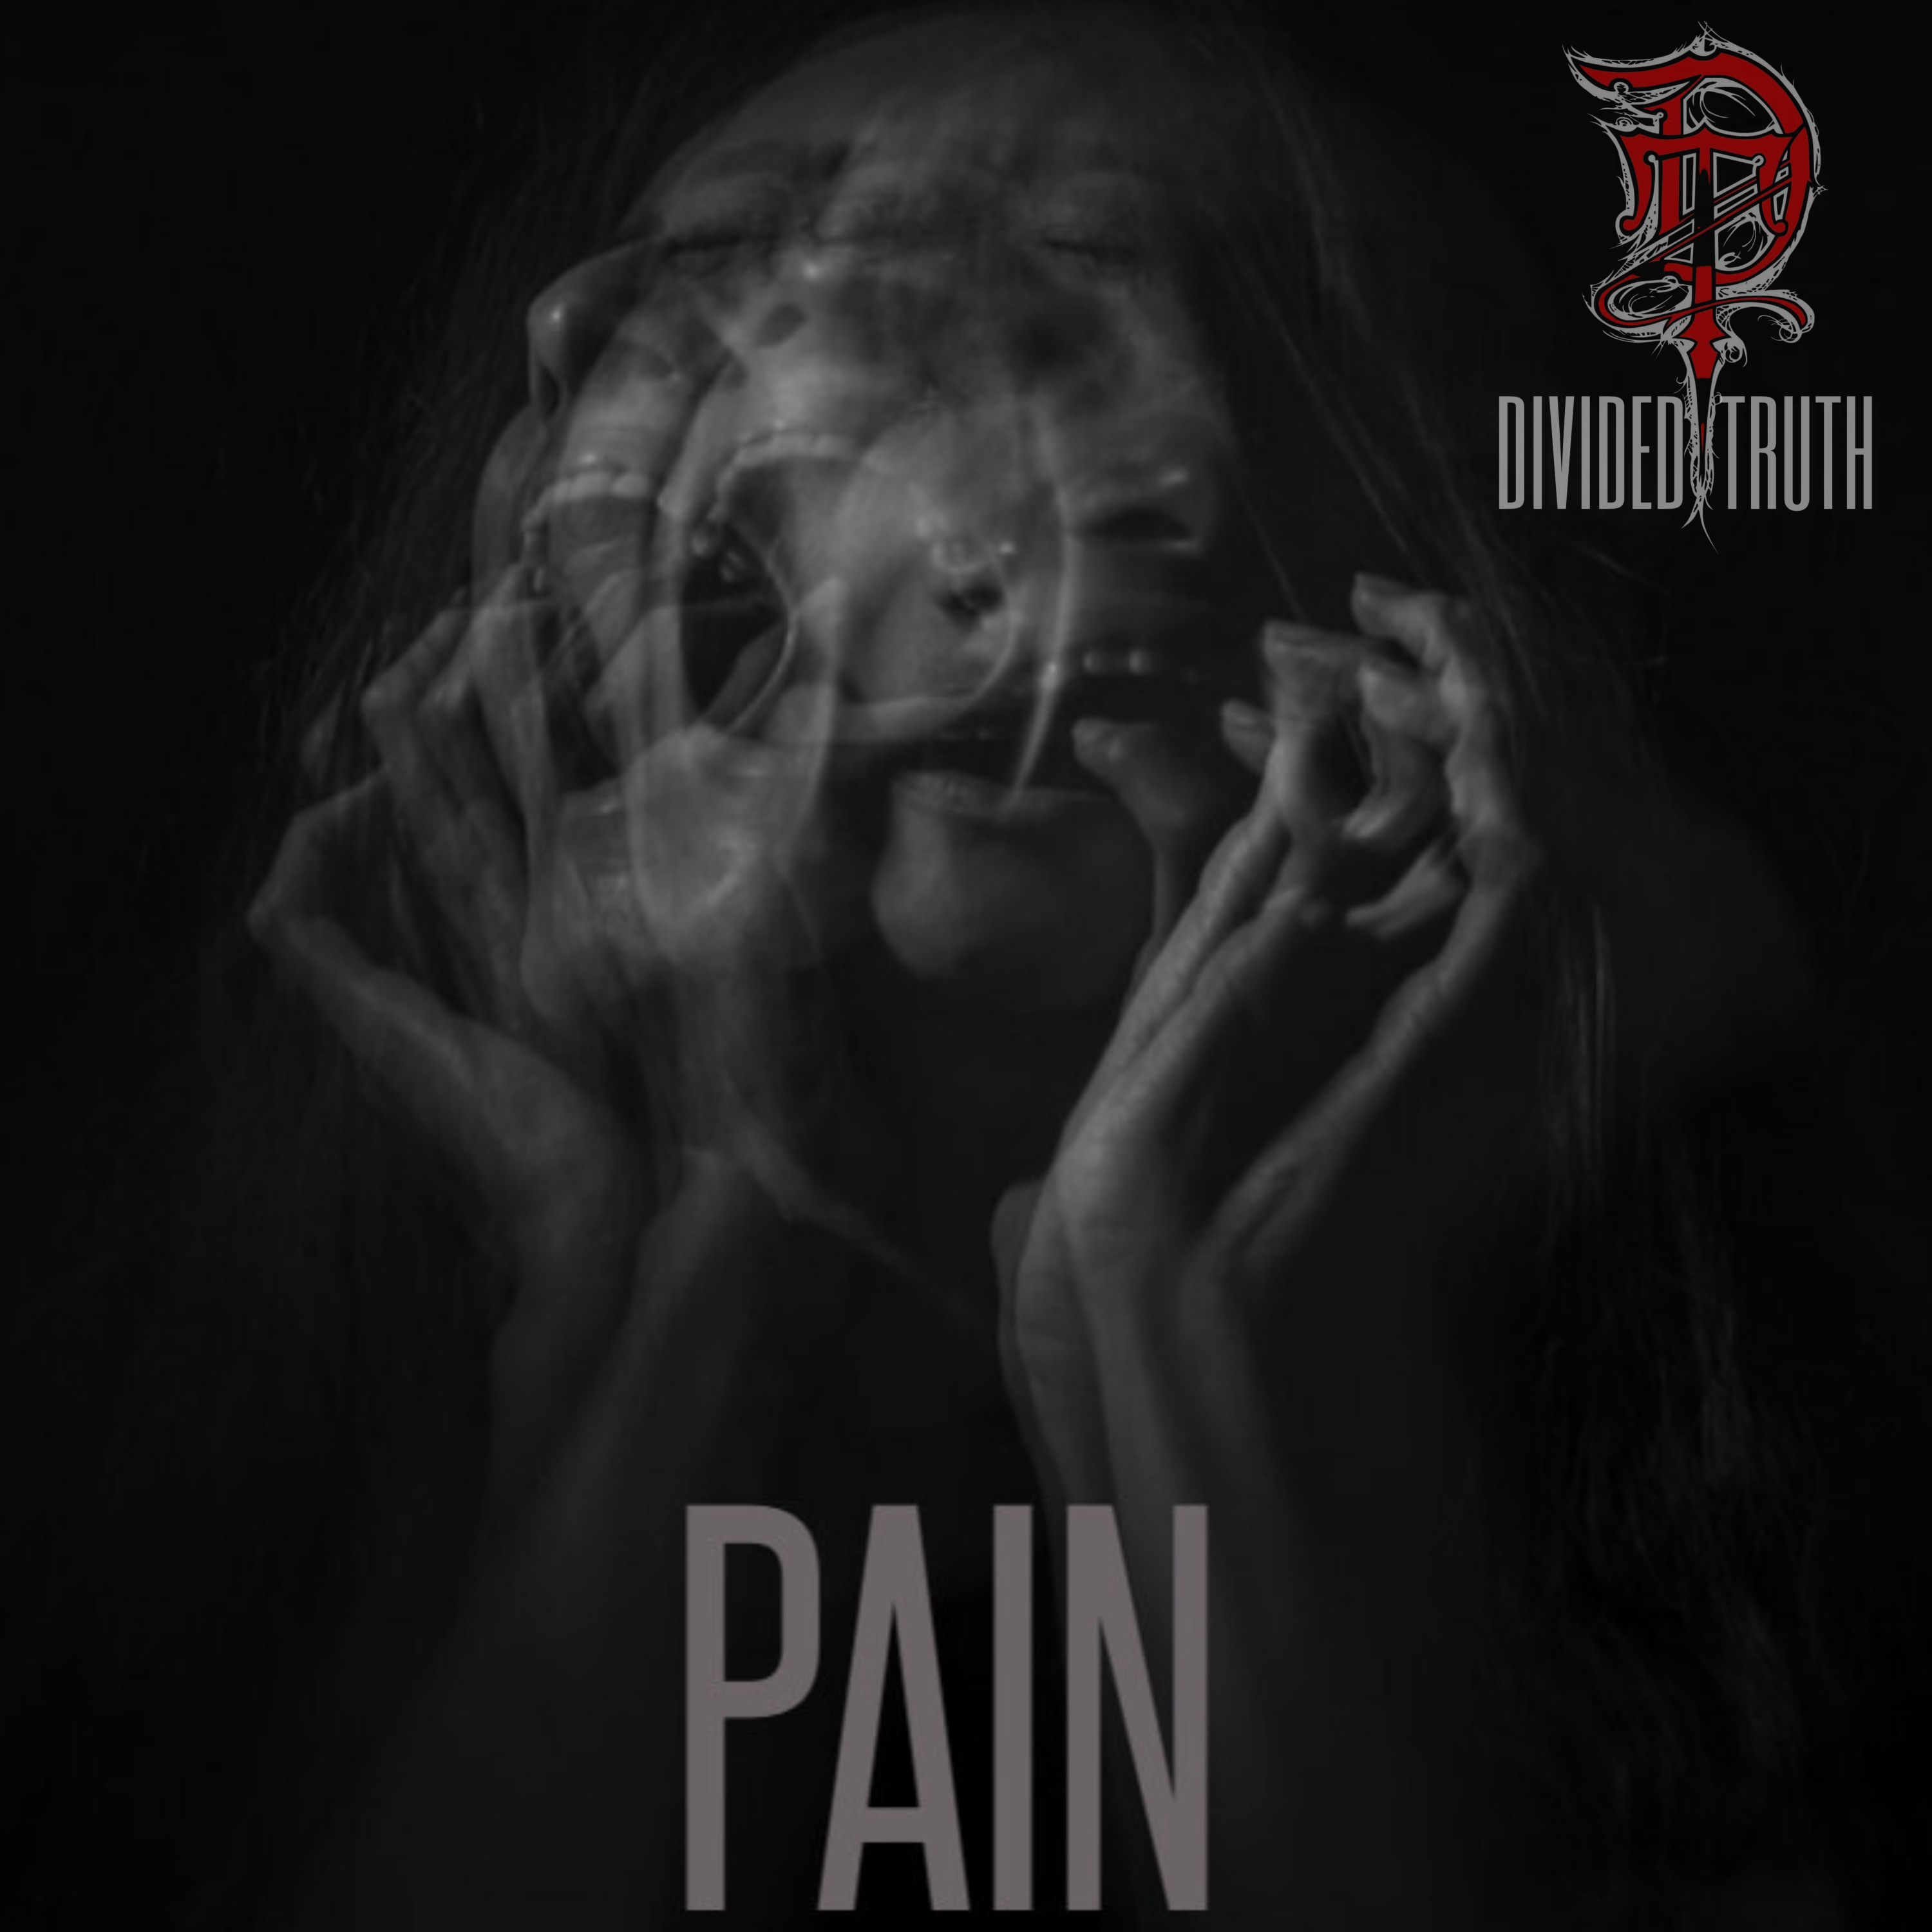 Art for Pain by Divided Truth